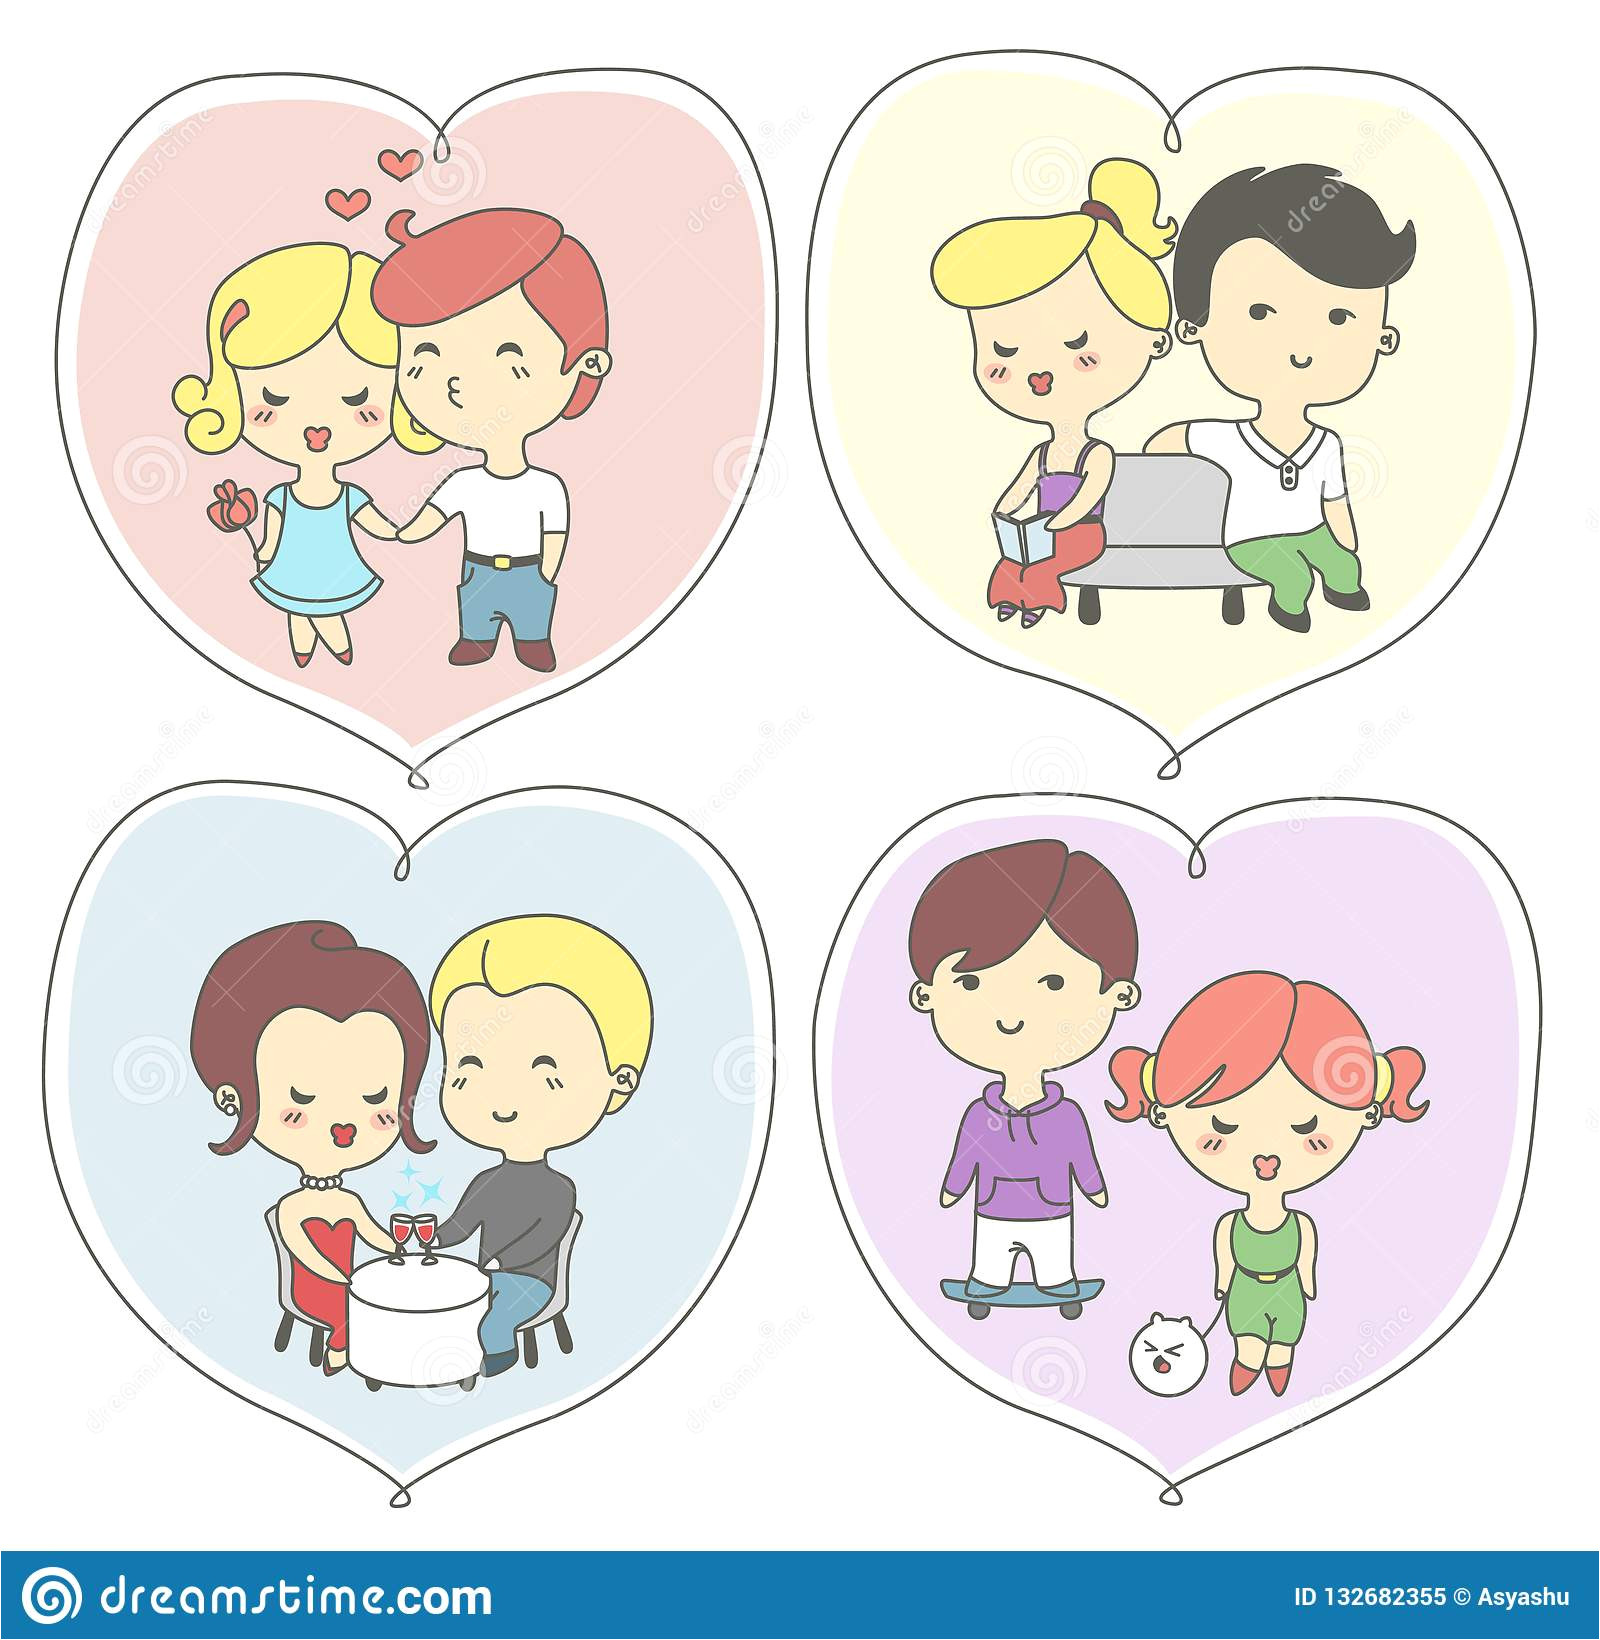 happy valentine c3 a2 e2 82 ac e2 84 a2s day greeting cards lovers couples holding hands kissing meeting drinking wine walking cute dog 132682355 jpg